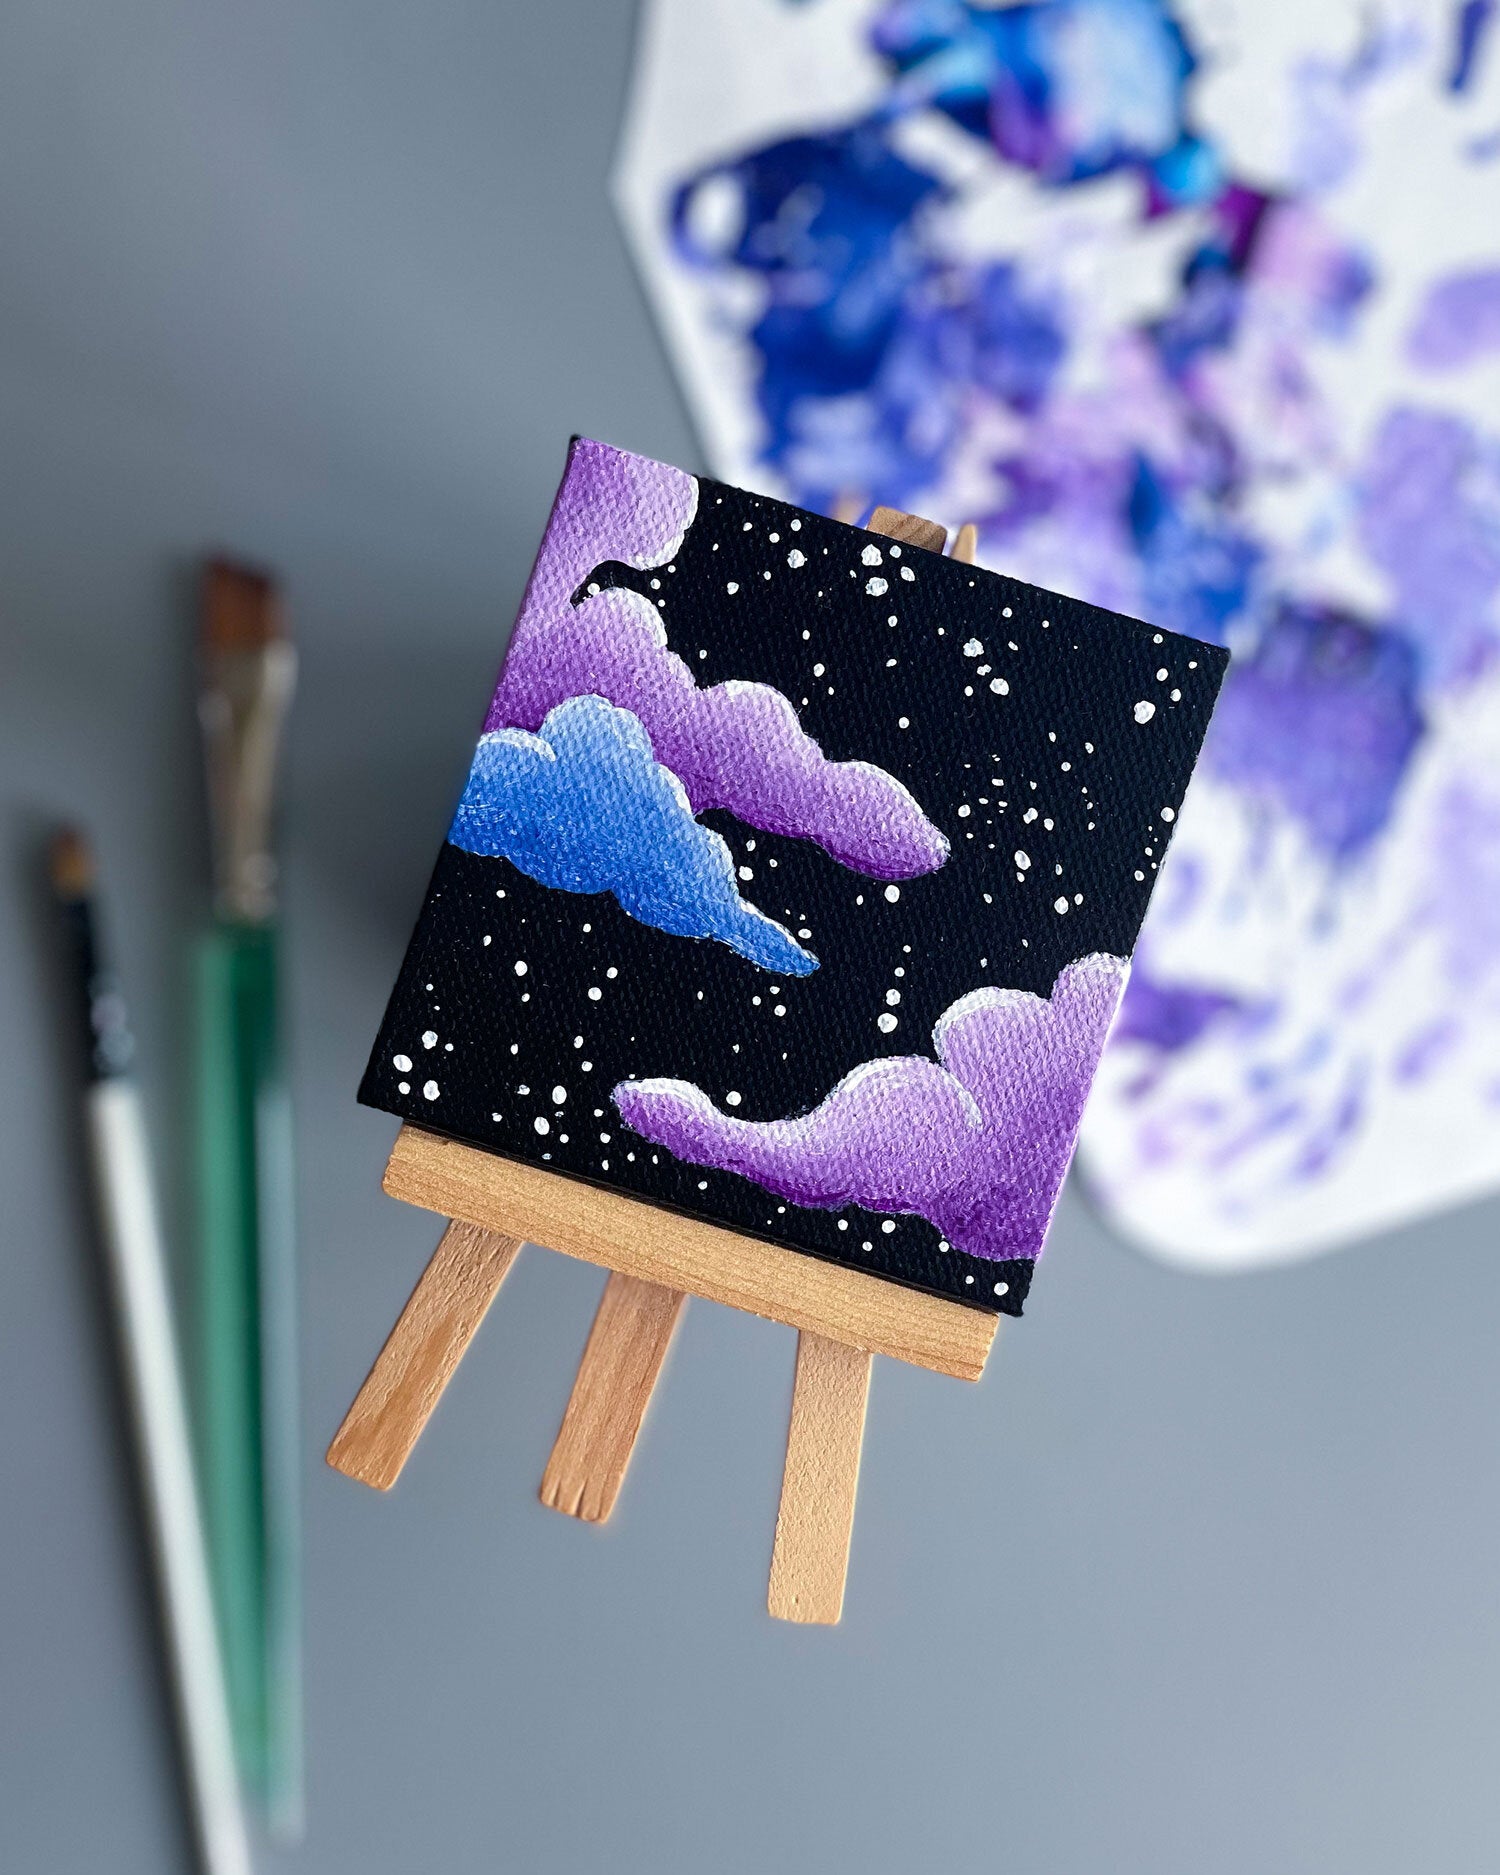 Milky Way Dreams Mini-Painting with Easel